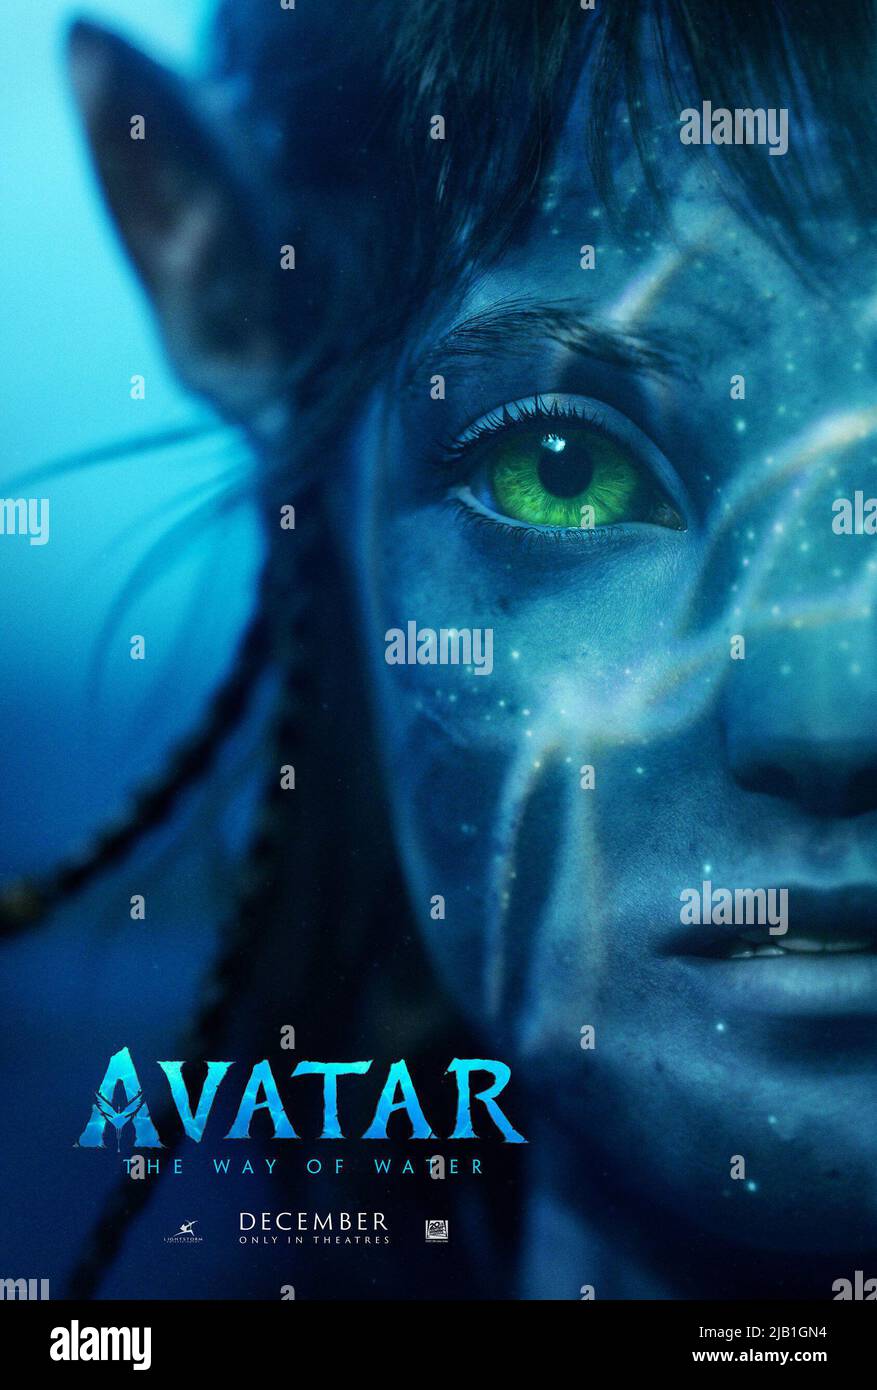 Avatar The Way of Water reviews vary wildly between critics  RNZ News